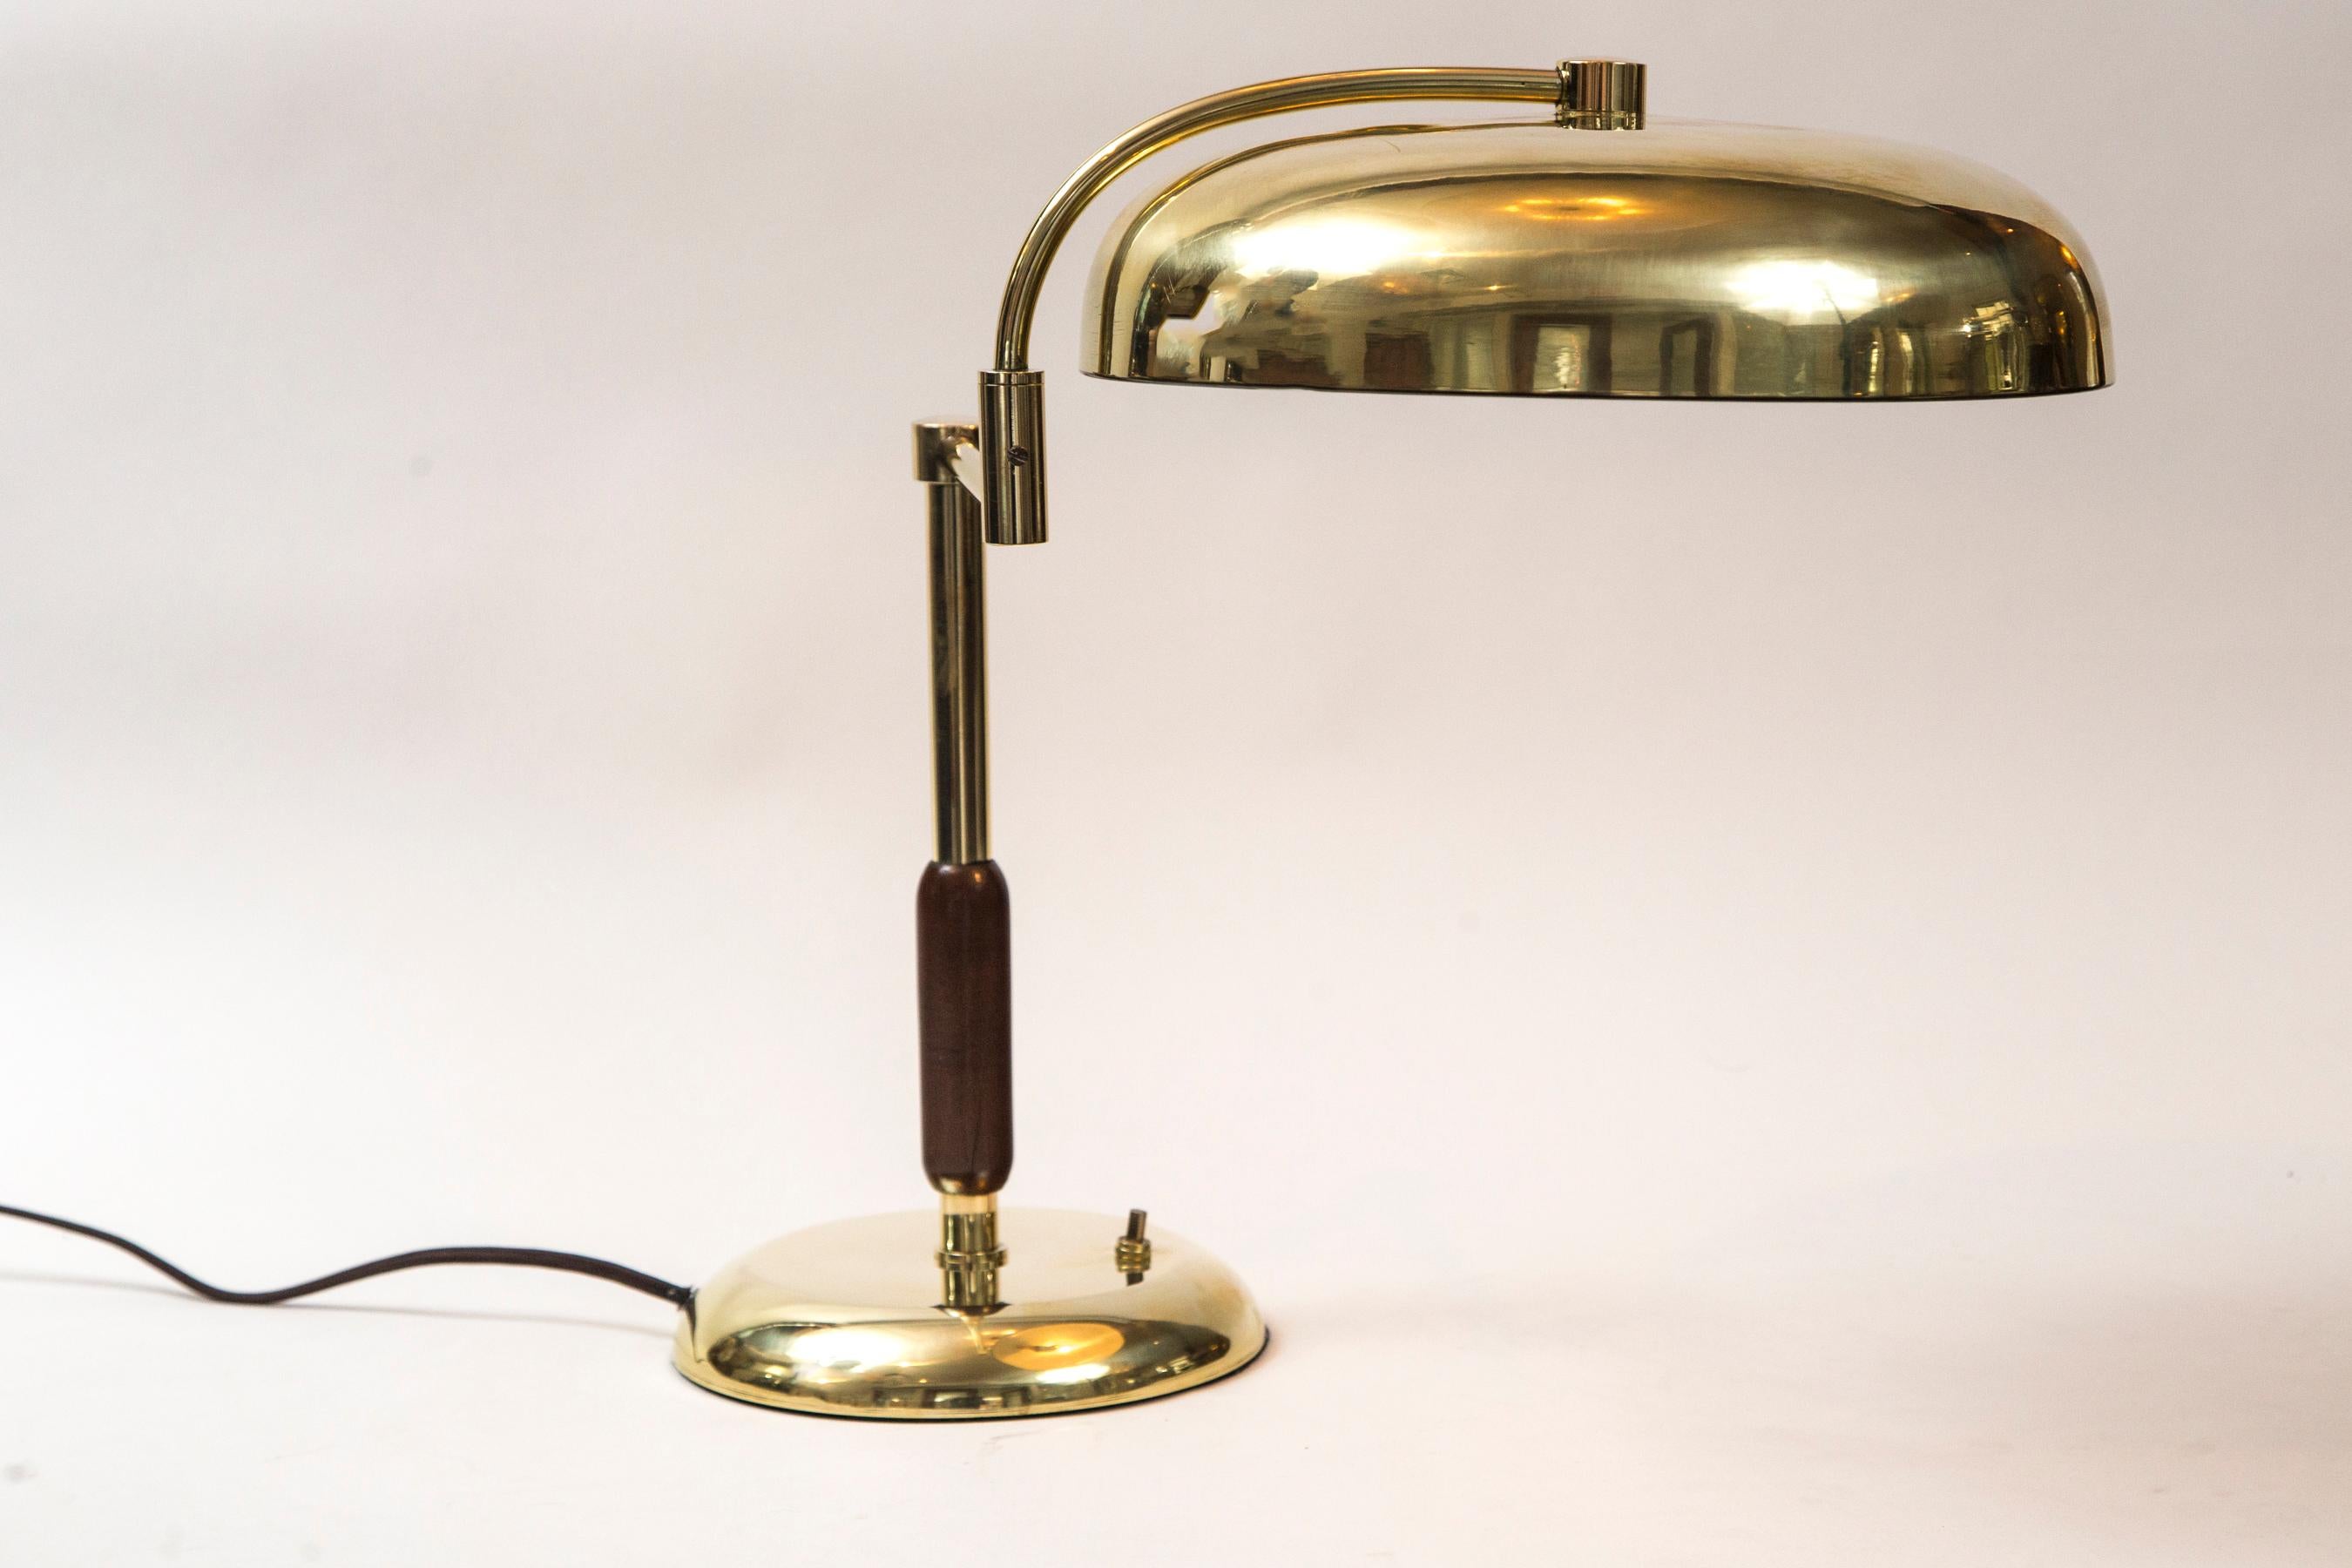 Large vintage unlacquered brass lamp with reticulating arm and shade designed by La Maison Desny
Ingenious folding function of the lamp inspired lighting designers into the midcentury
Very heavy lamp as base is weighted.

Condition: Excellent,